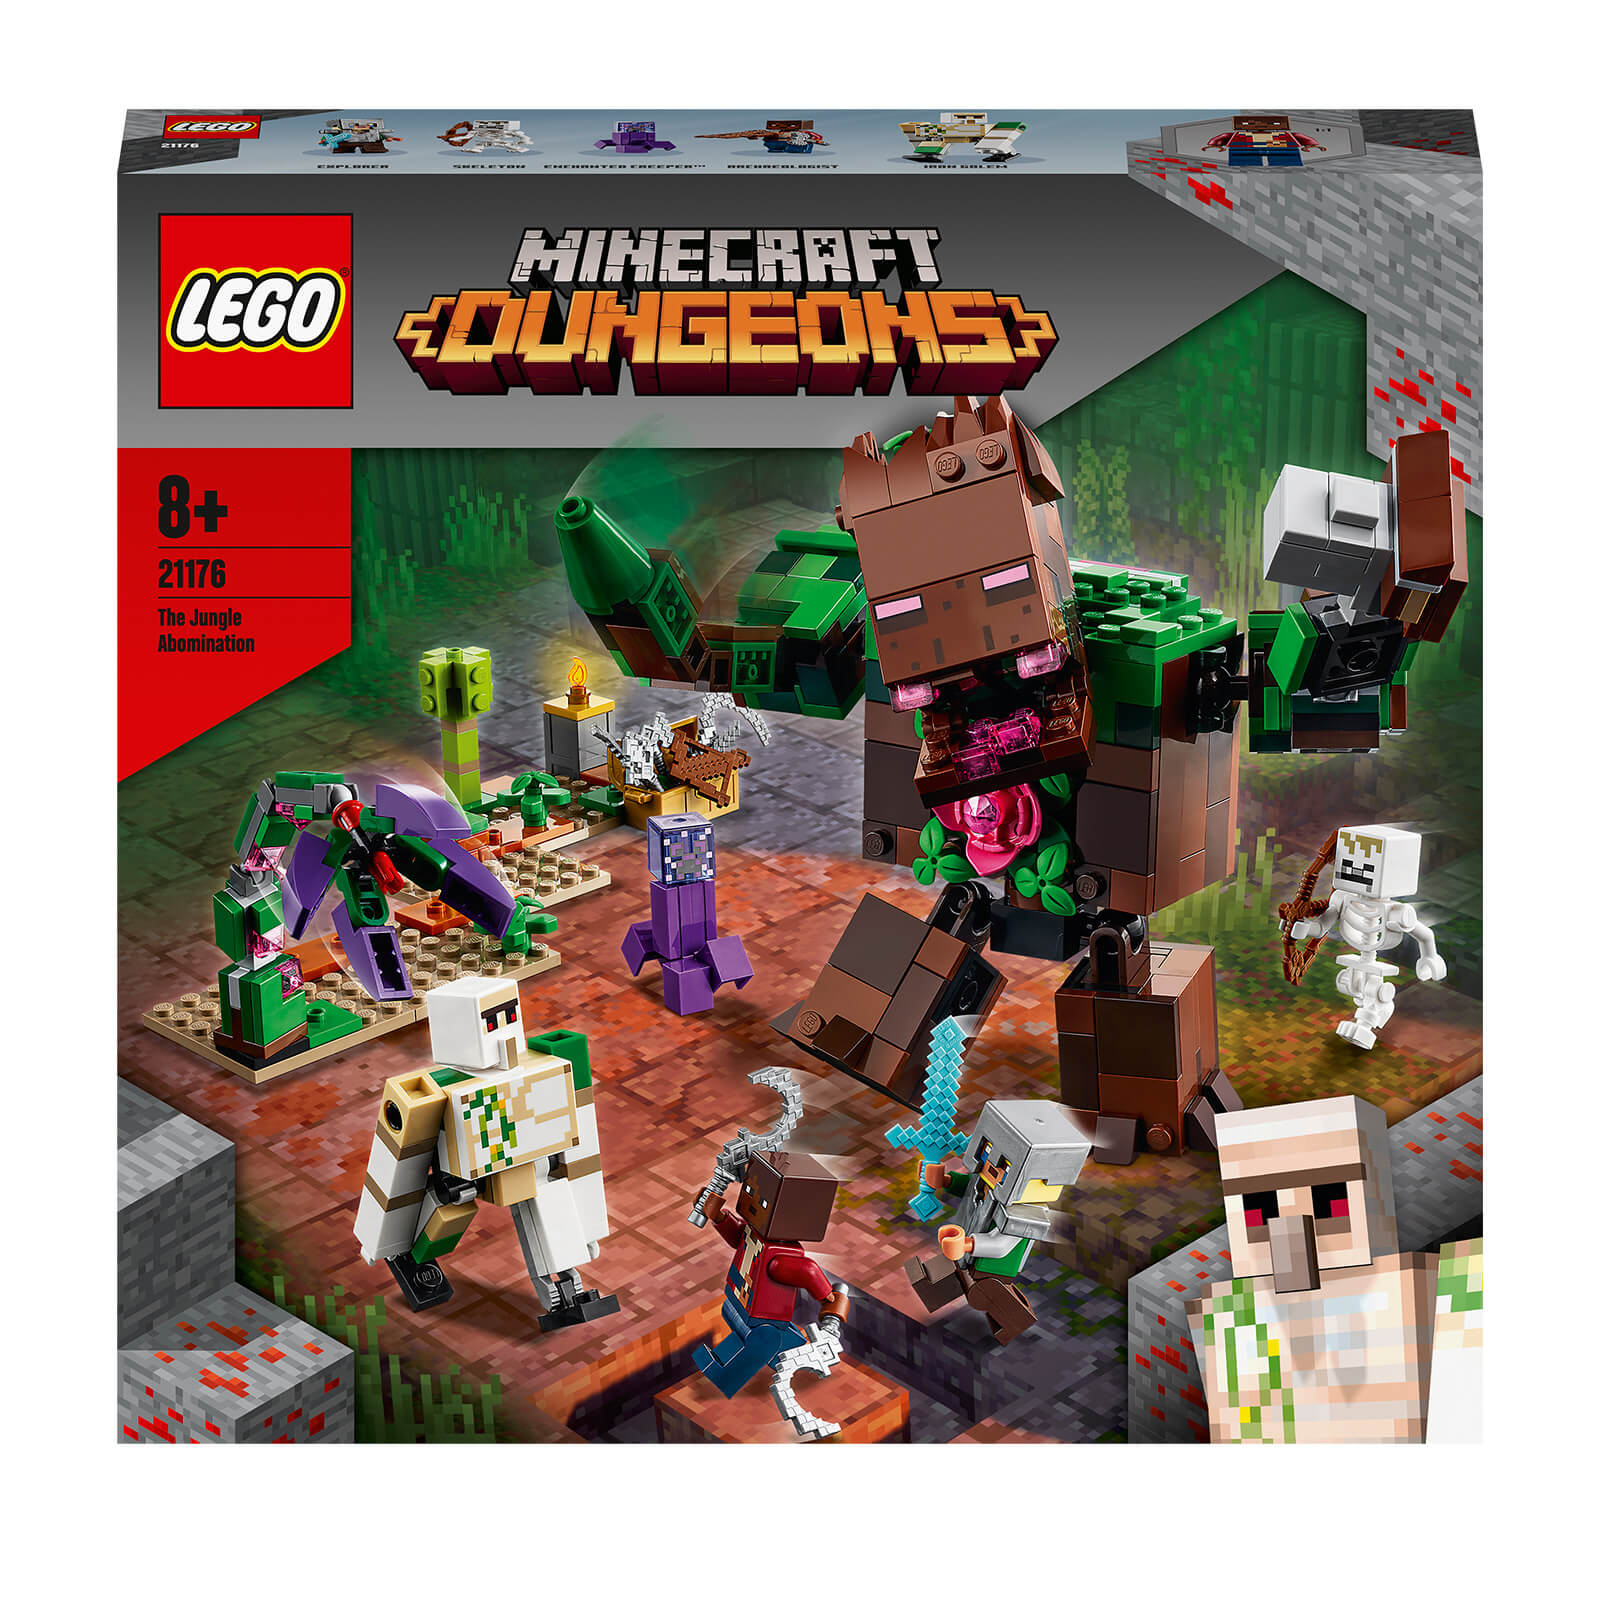 LEGO Minecraft: The Jungle Abomination Dungeons Toy Set (21176)